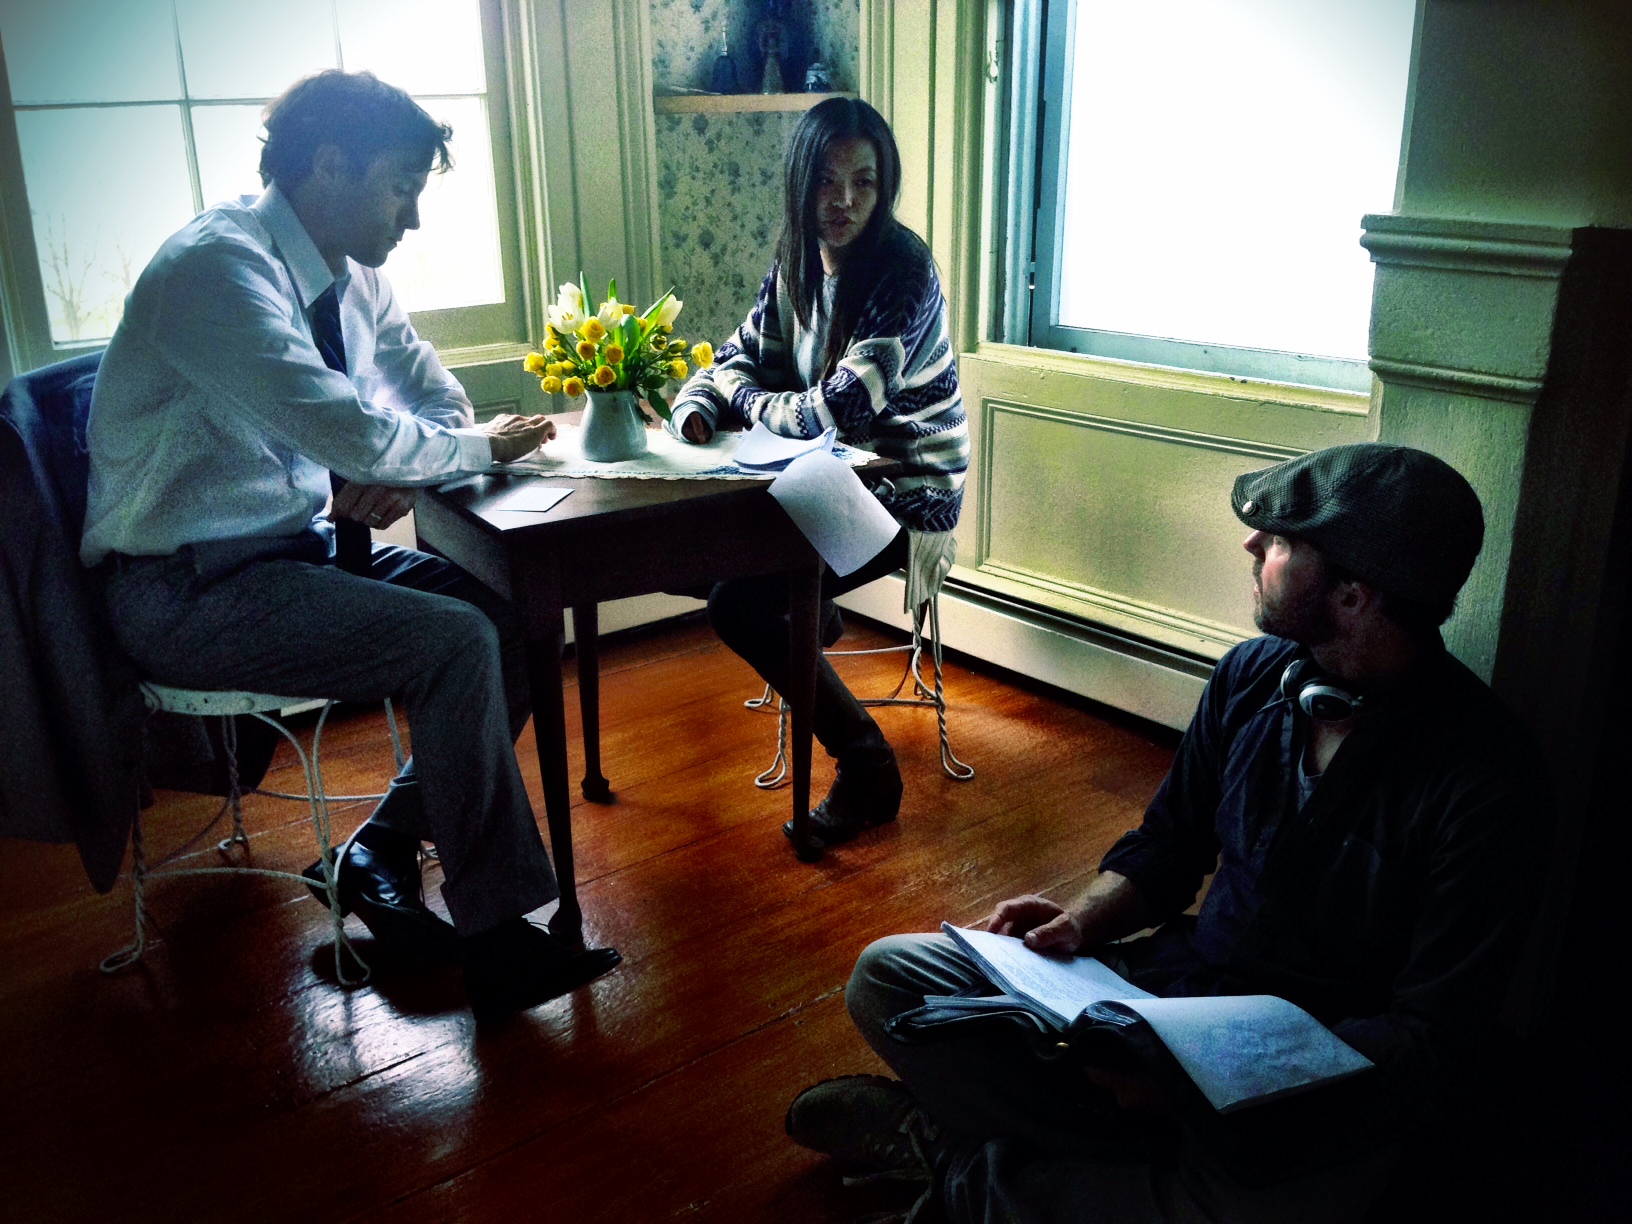 Jenn Liu with Nathan Darrow on the set of The Inherited, directed by Devon Gummersall